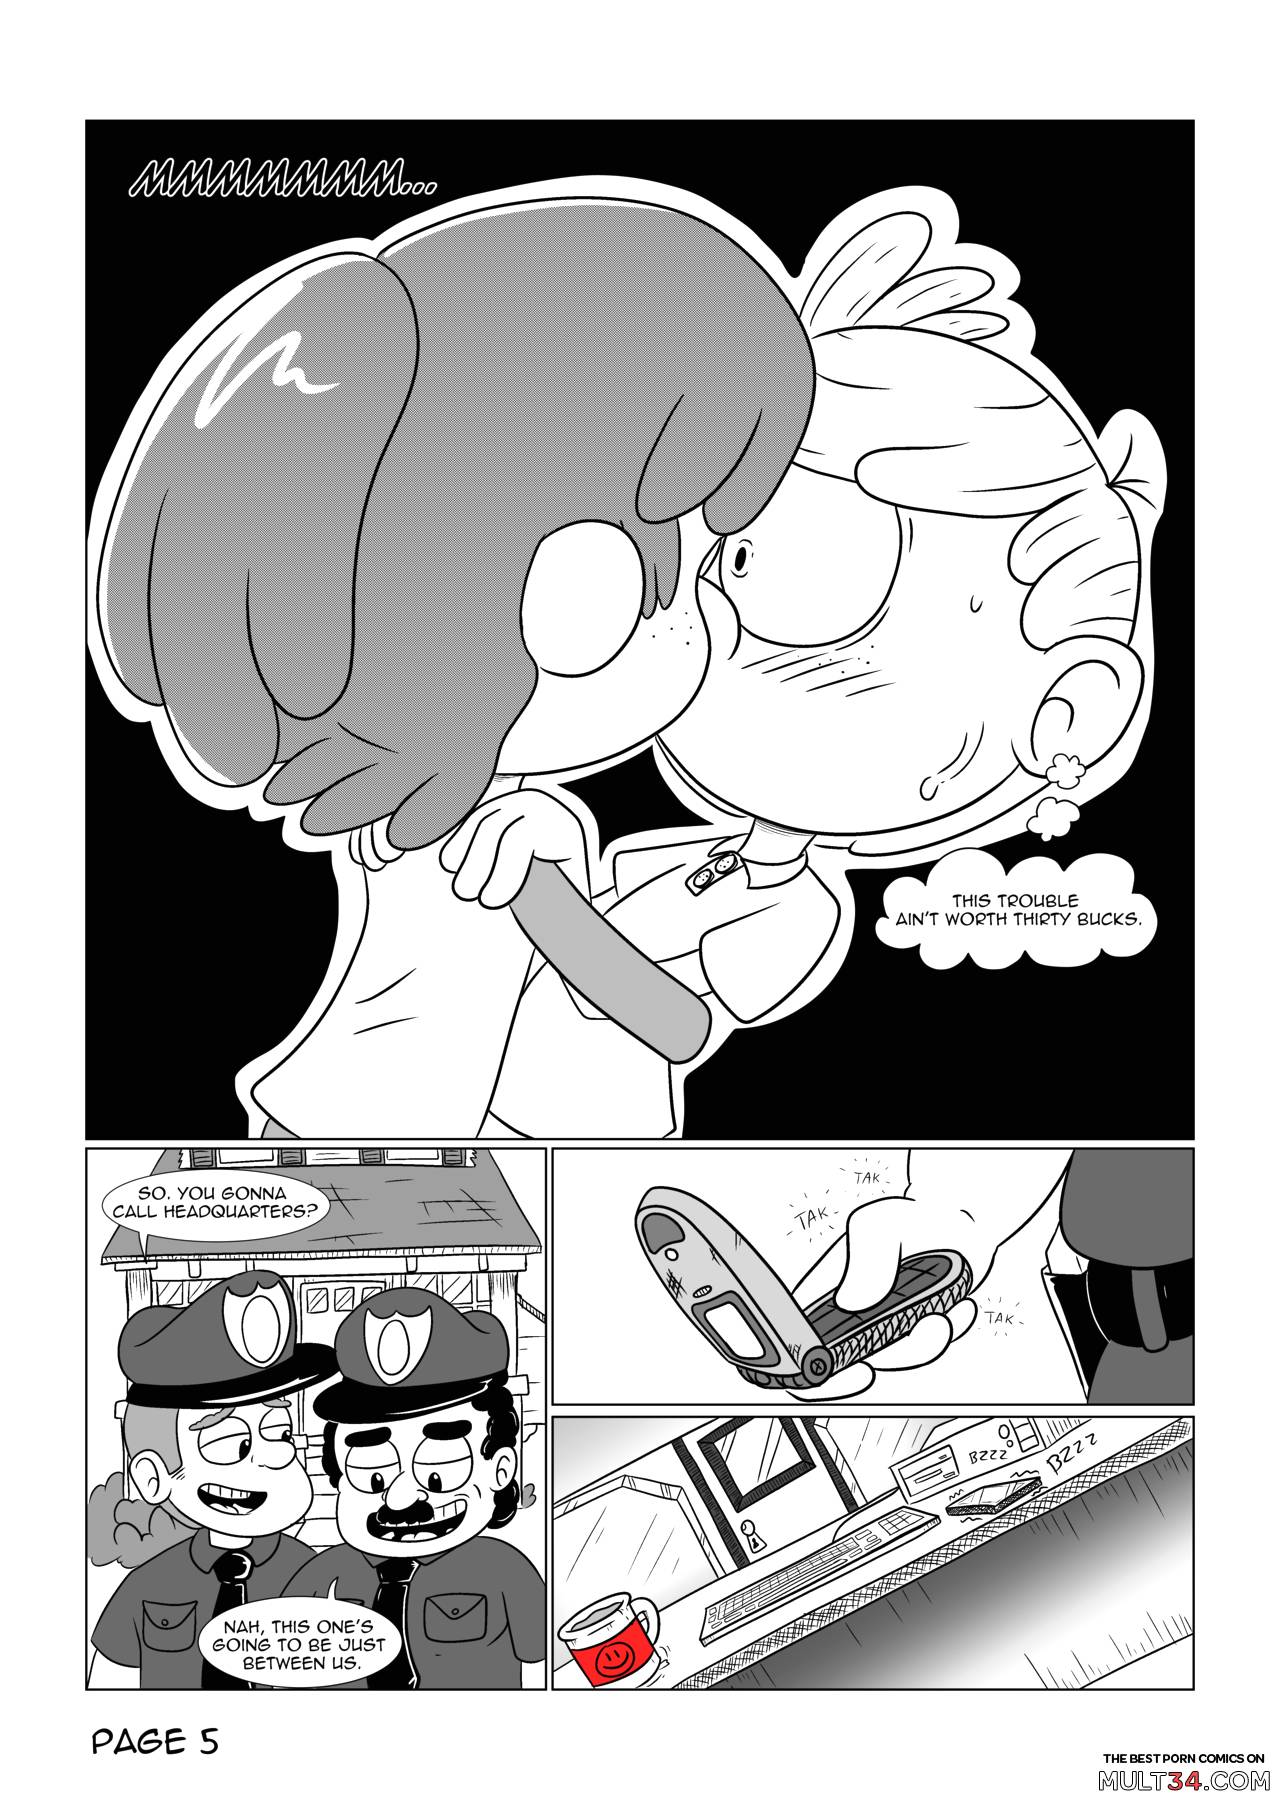 The loud house comic, chapter 3 page 6